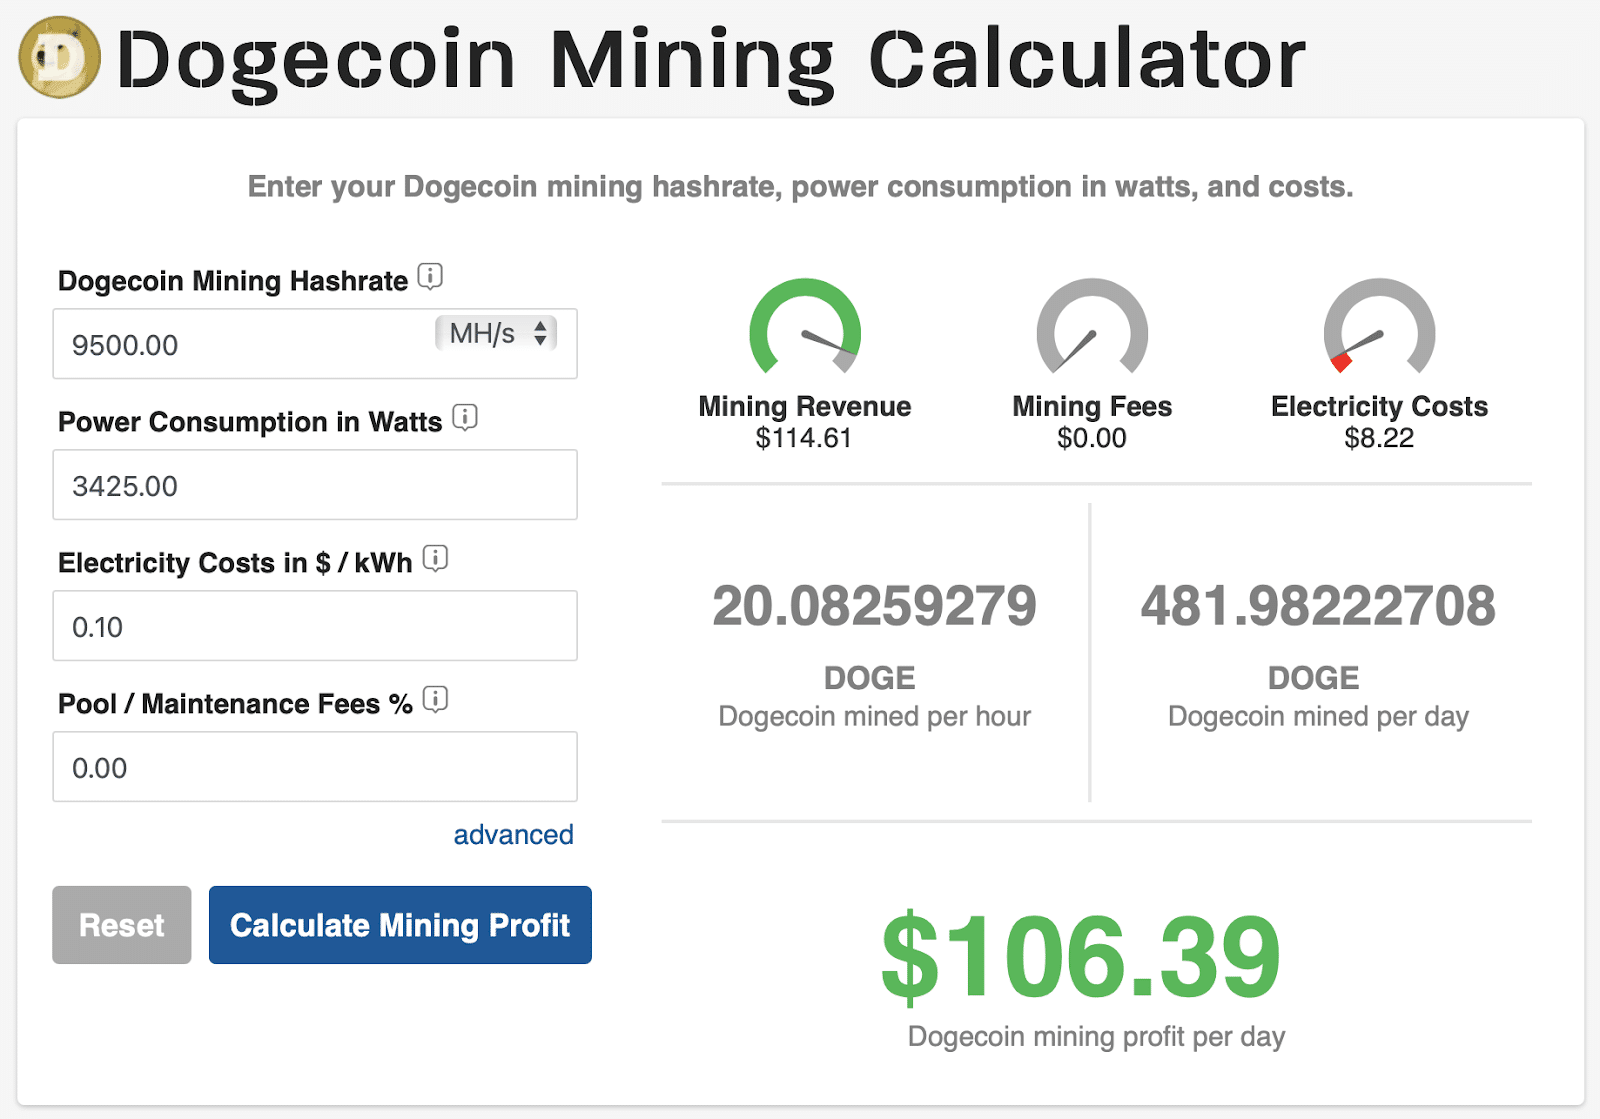 LTC Litecoin with DOGE Dogecoin mining profit calculator - WhatToMine